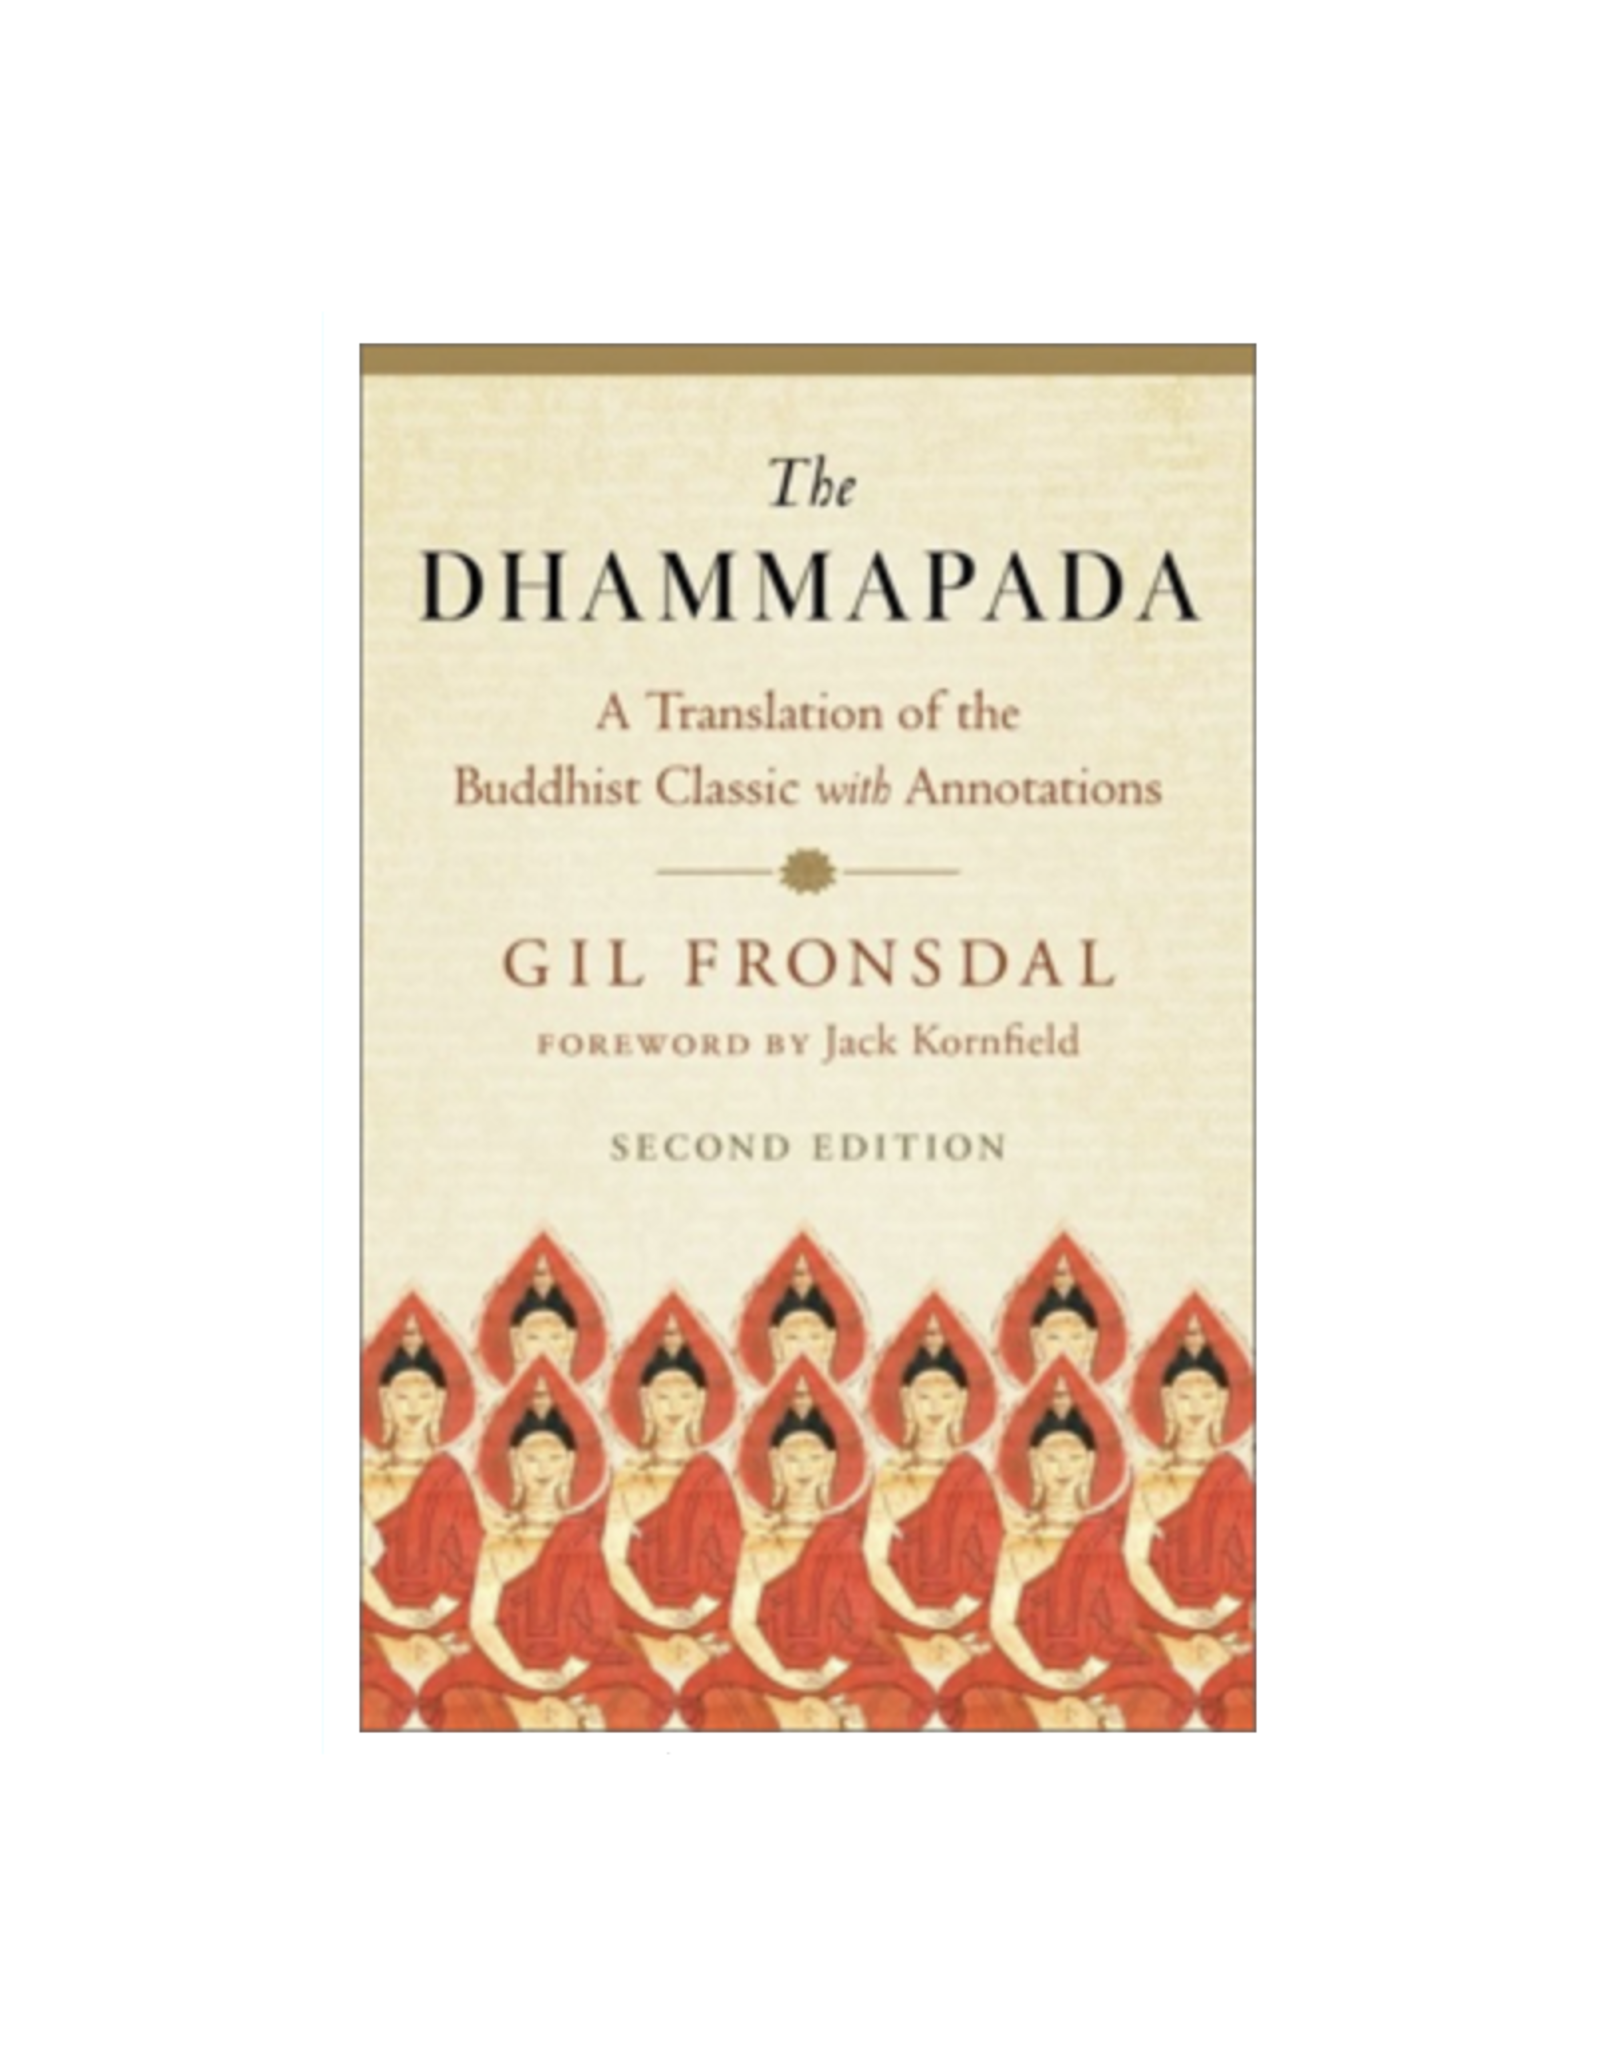 Dhammapada - A New Translation of the Buddhist Classic with Annotations